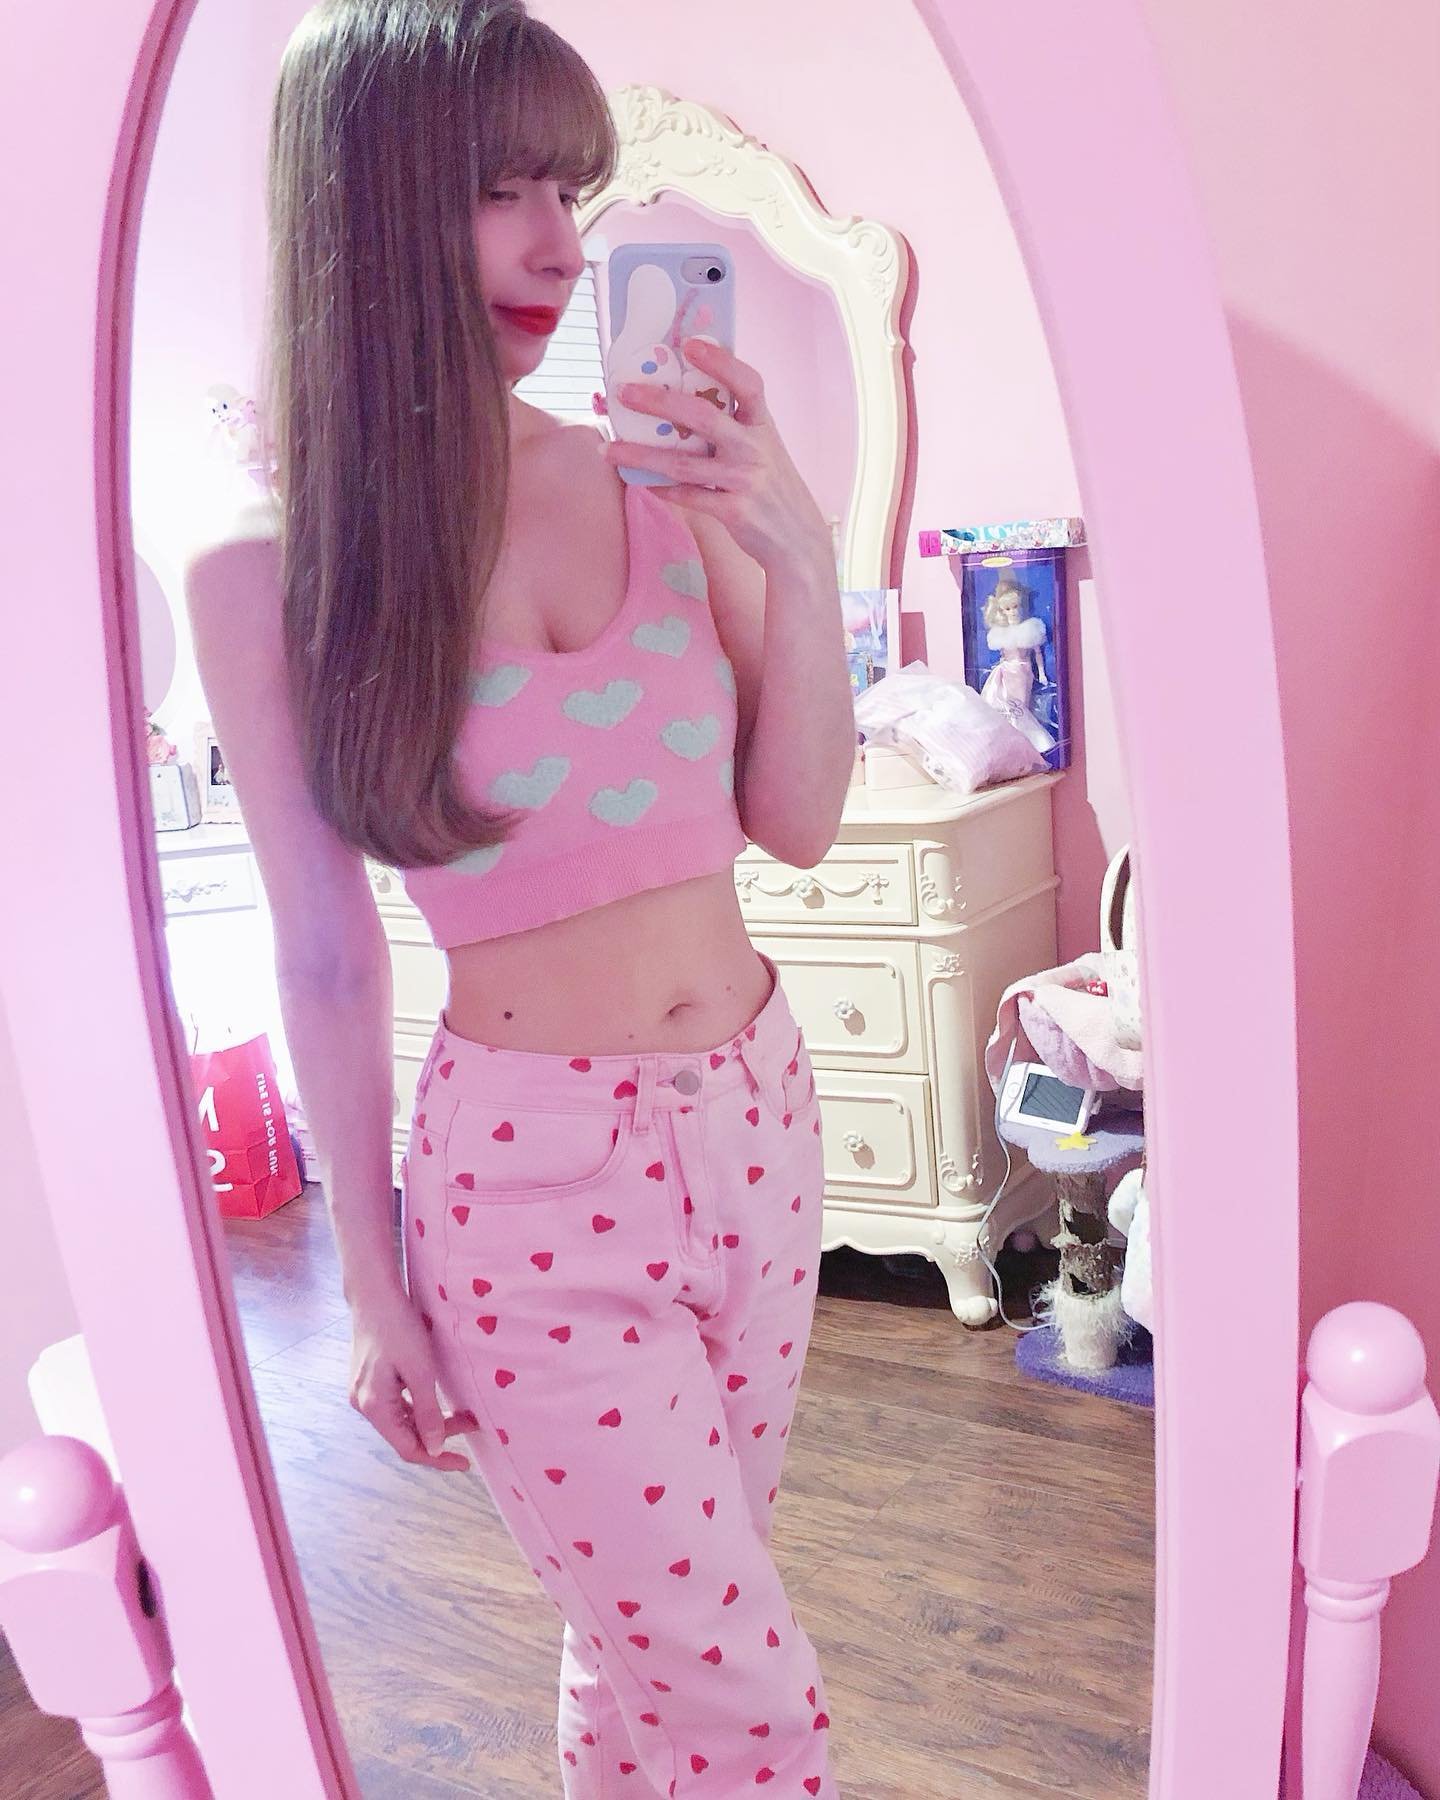 Pretty in pink with hearts. ≽^&bull;༚&bull;🎀≼ Happy Friday lovelies. I&rsquo;m so happy. These pants used to be so tight I couldn&rsquo;t bend in them but now they&rsquo;re loose! Whoo! I missed wearing them. 
.
#margaritabloom #pink #pinkfashion #p